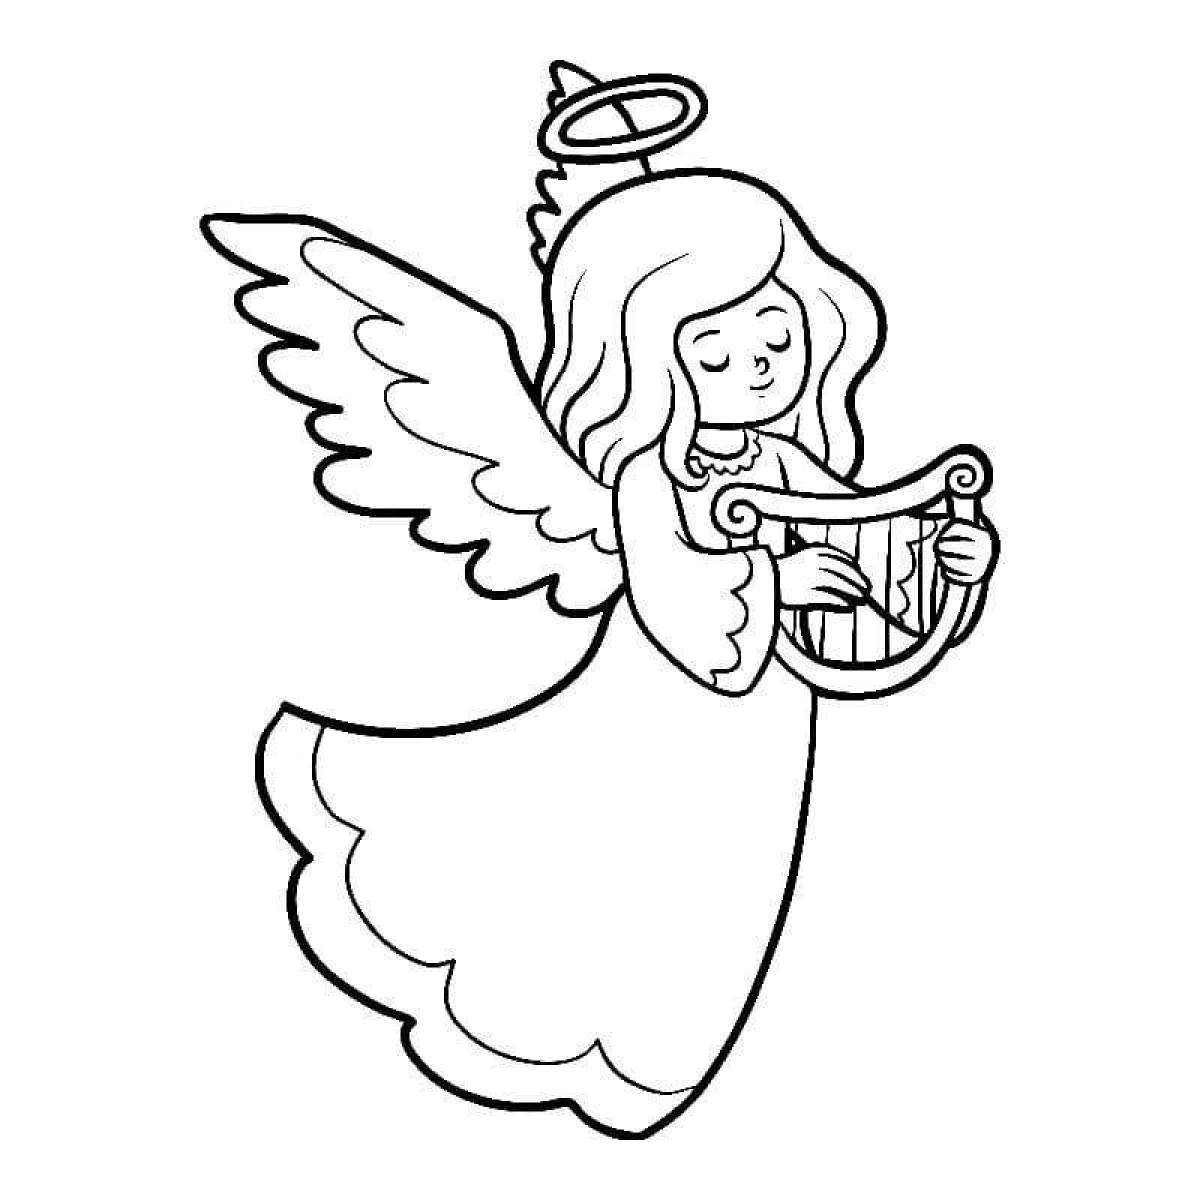 Delightful angel with wings coloring book for kids